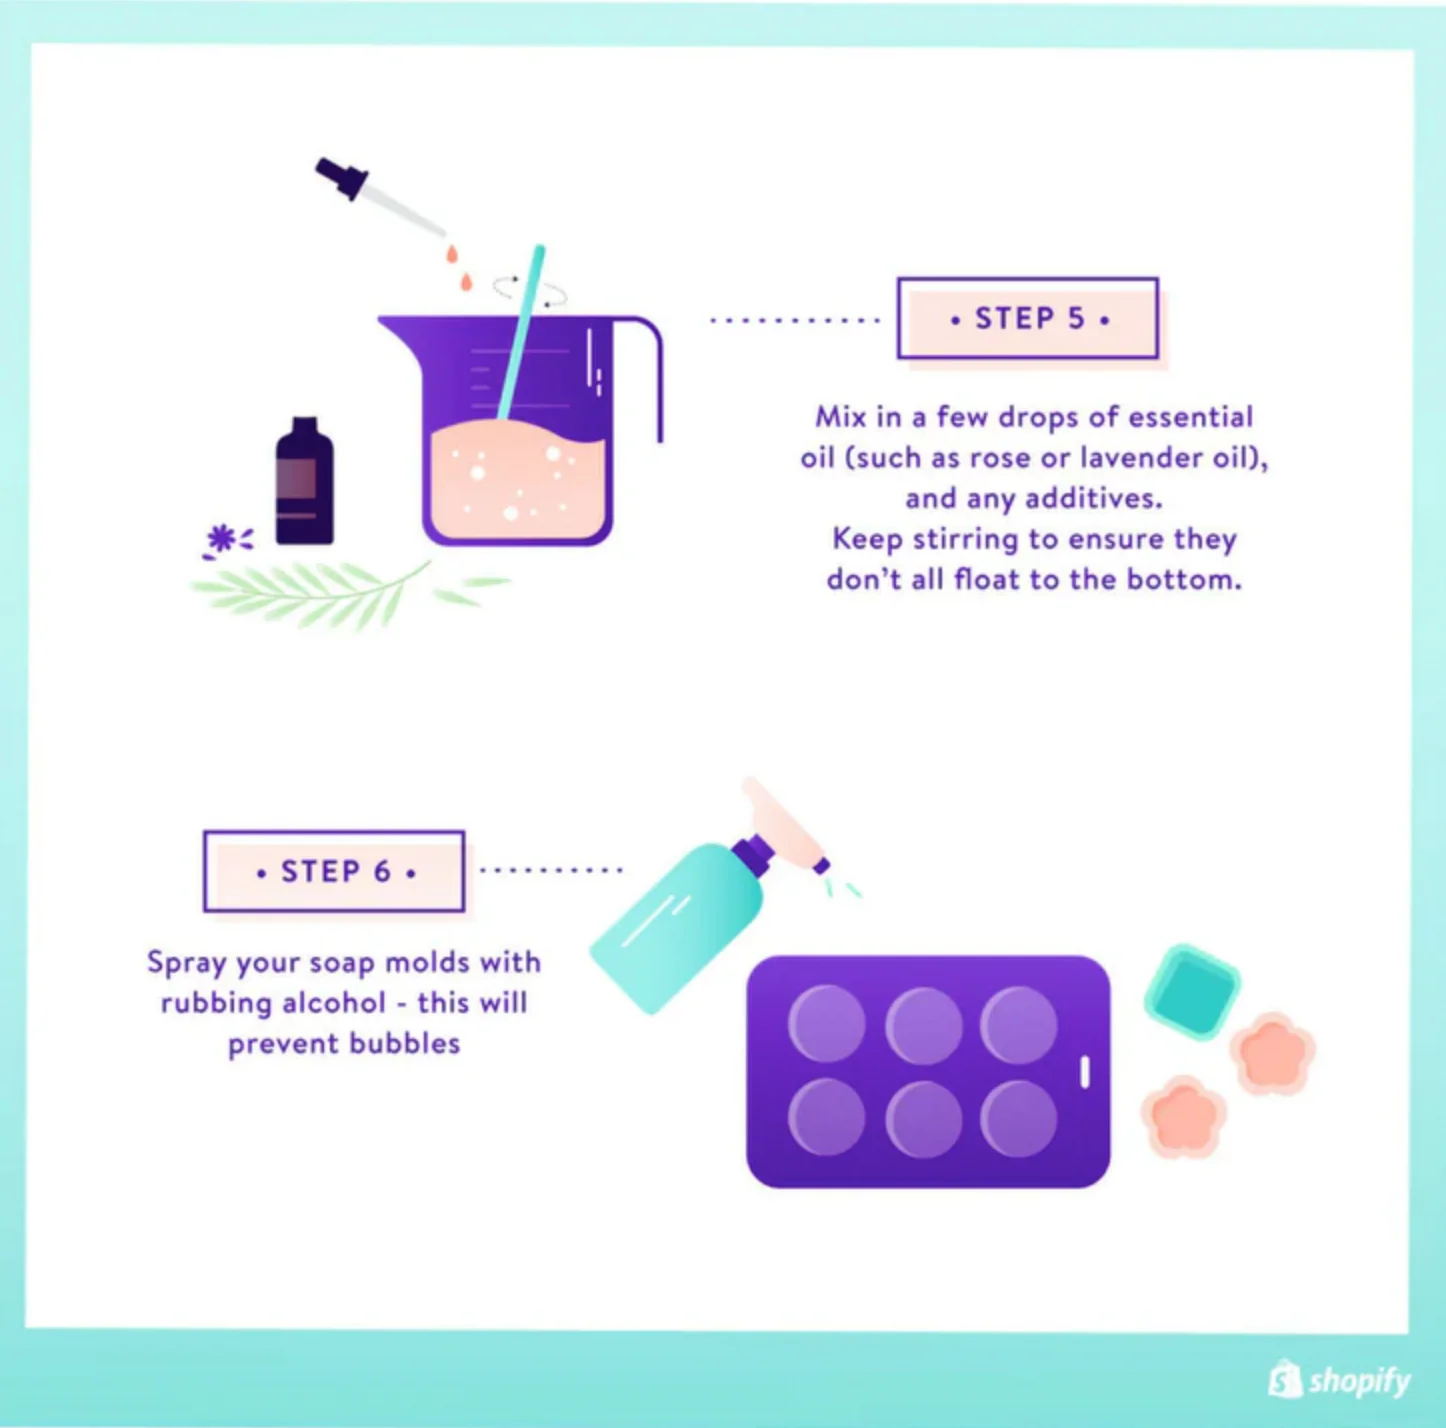 Illustration showing step 5 (mixing fragrance and additives) and step 6 (spray molds with rubbing alcohol) of making soap